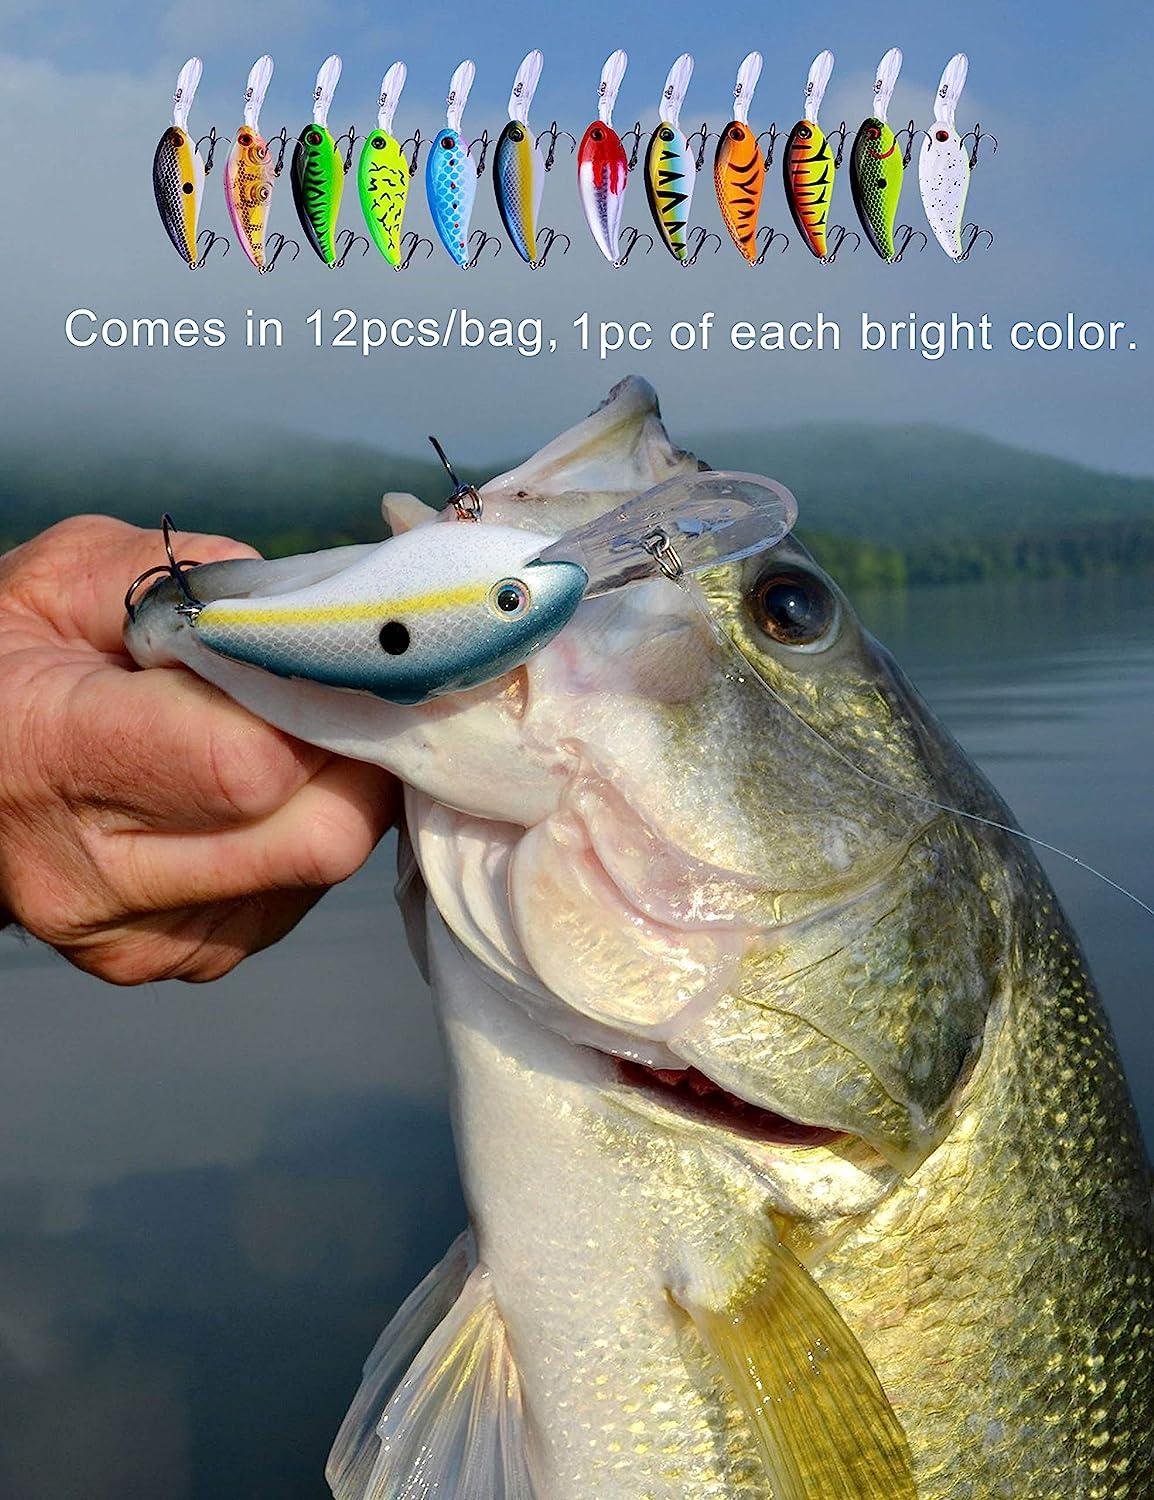  NUOMI Crankbait Fishing Lures Bass Hard Topwater  Panfish/Crappie Lure Hooks Artificial Baits 5 Pieces Mini Fishing Tackle :  Sports & Outdoors